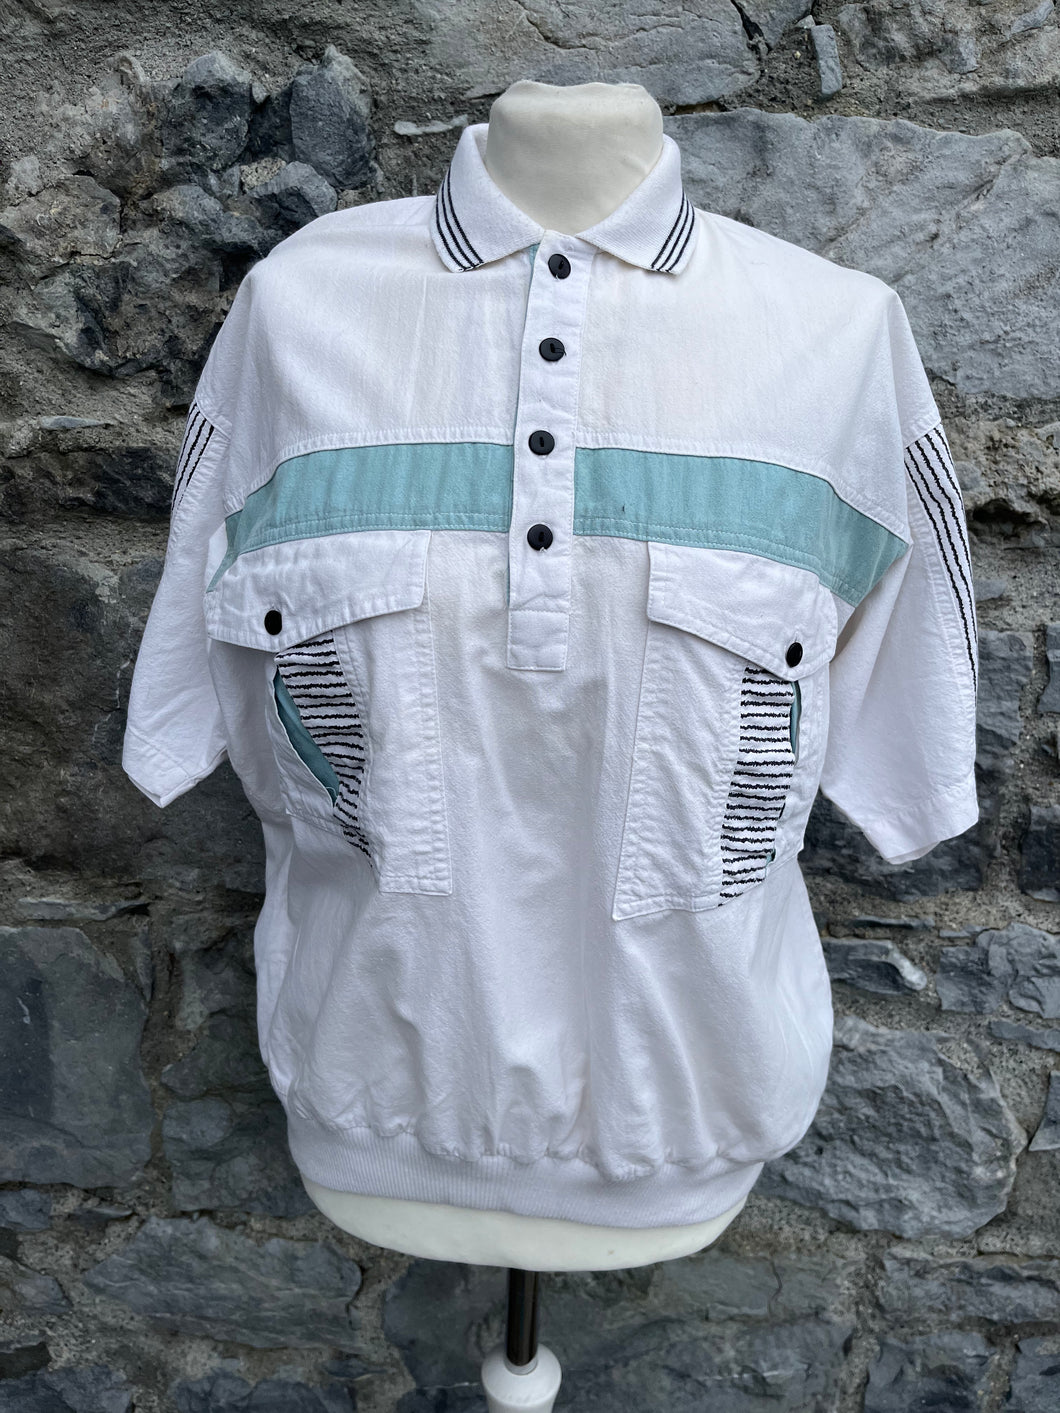 80s white golf top     Small